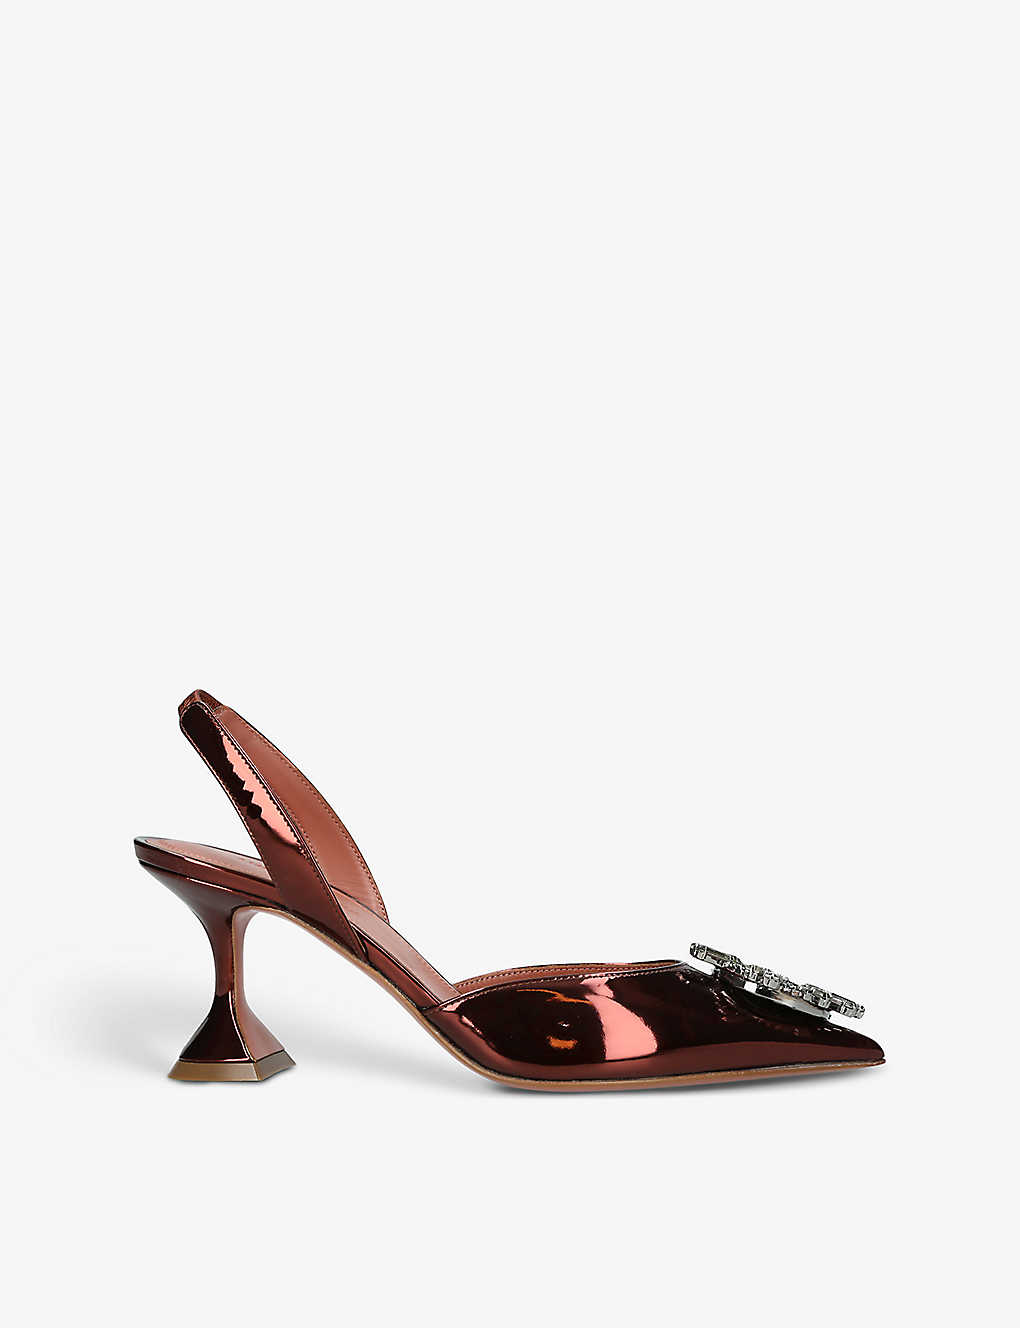 Amina Muaddi Womens Brown Begum Slingback Crystal-embellished Mirrored-leather Courts